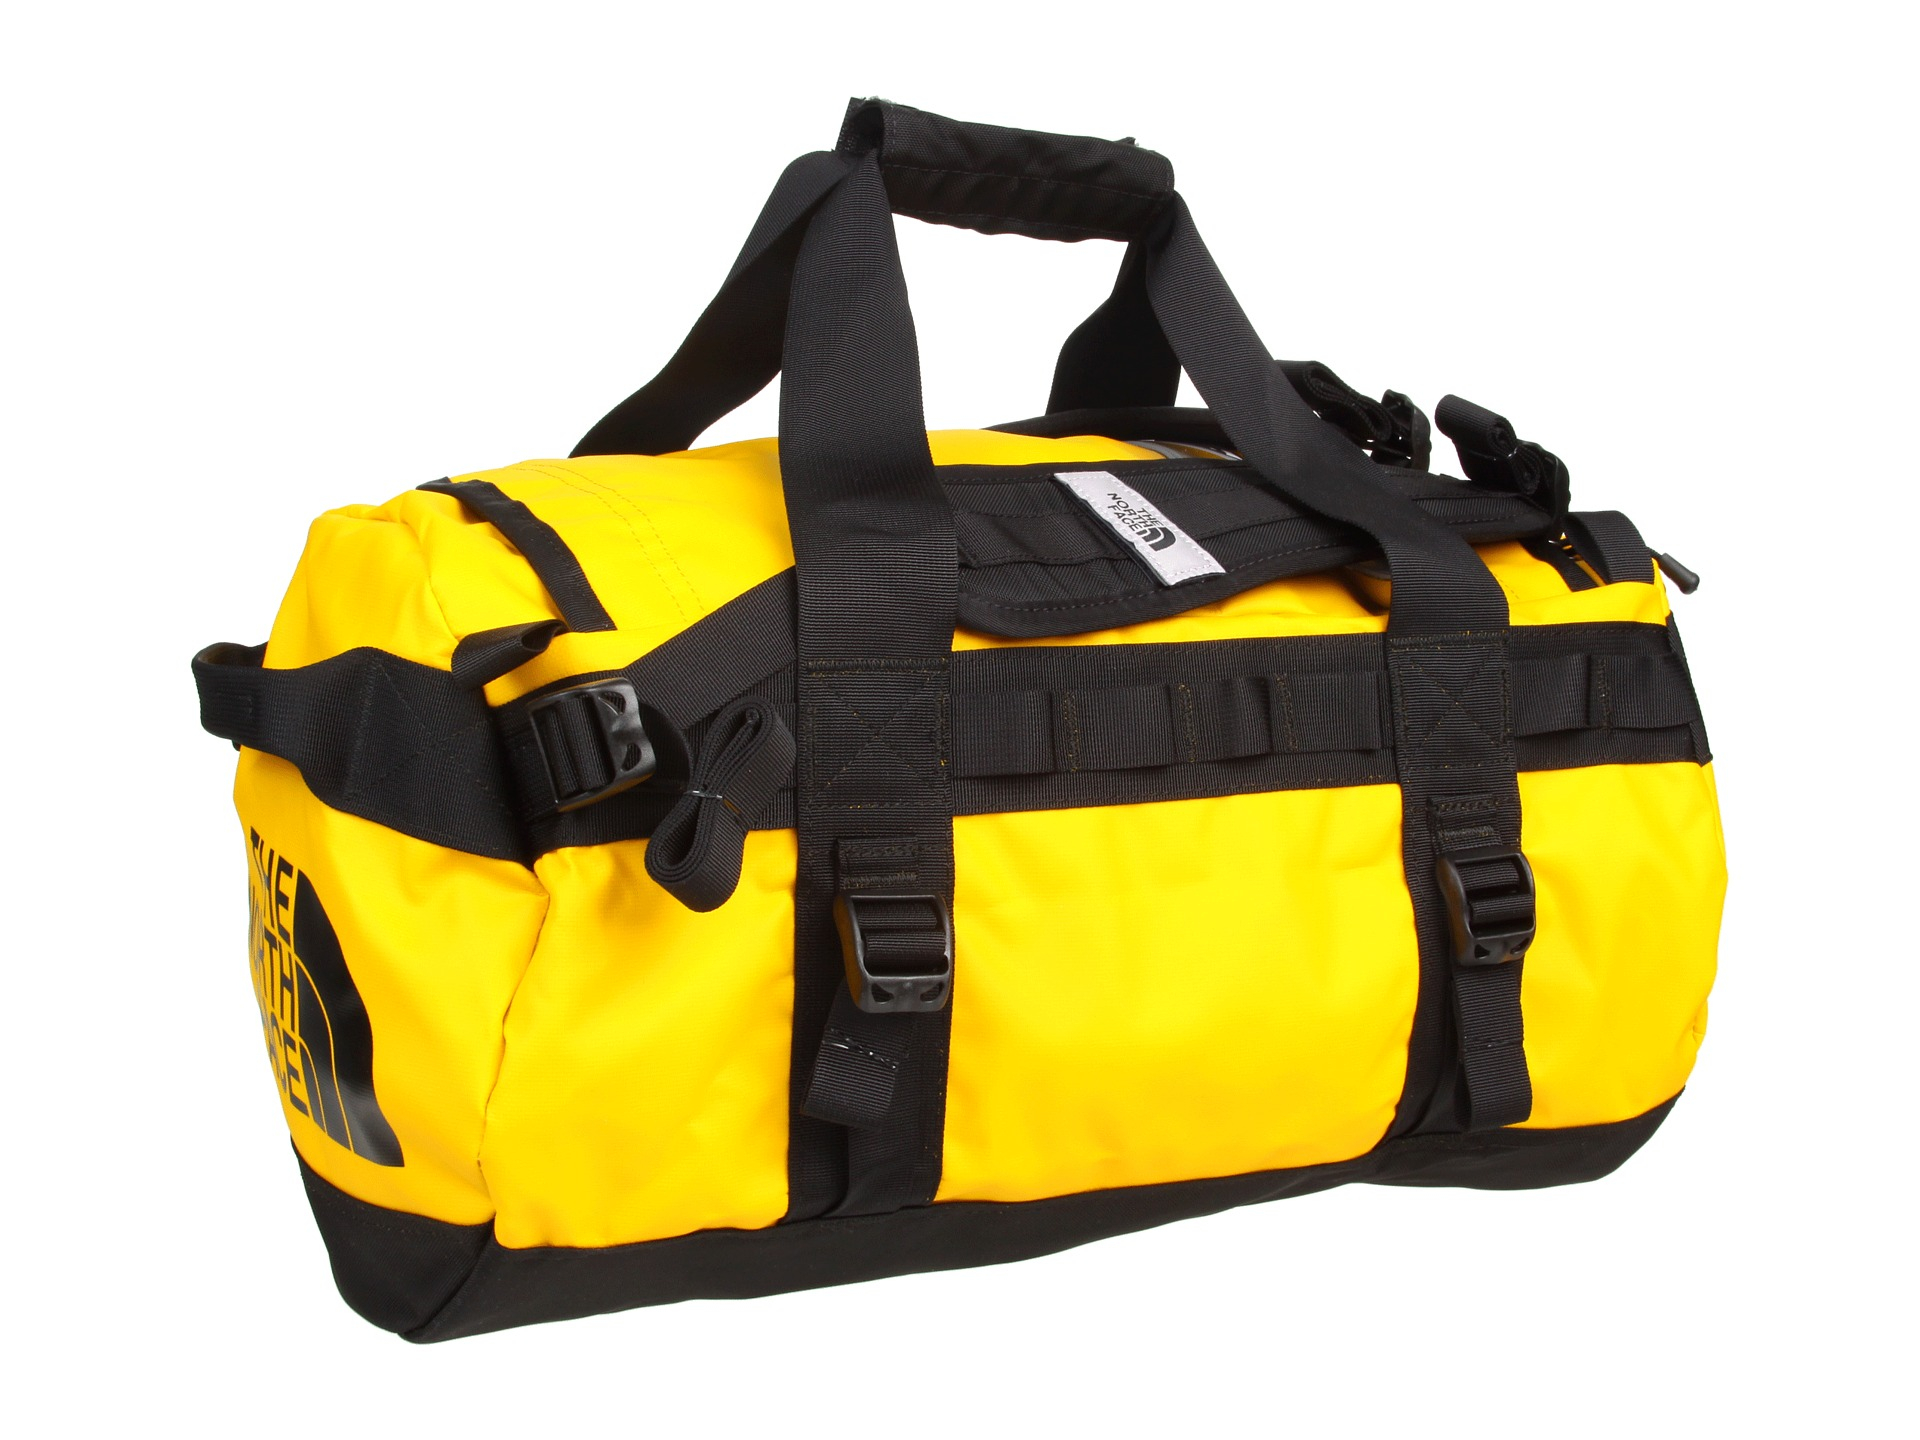 north face duffel bag xs sale Cheaper Than Retail Price> Buy Clothing,  Accessories and lifestyle products for women & men -